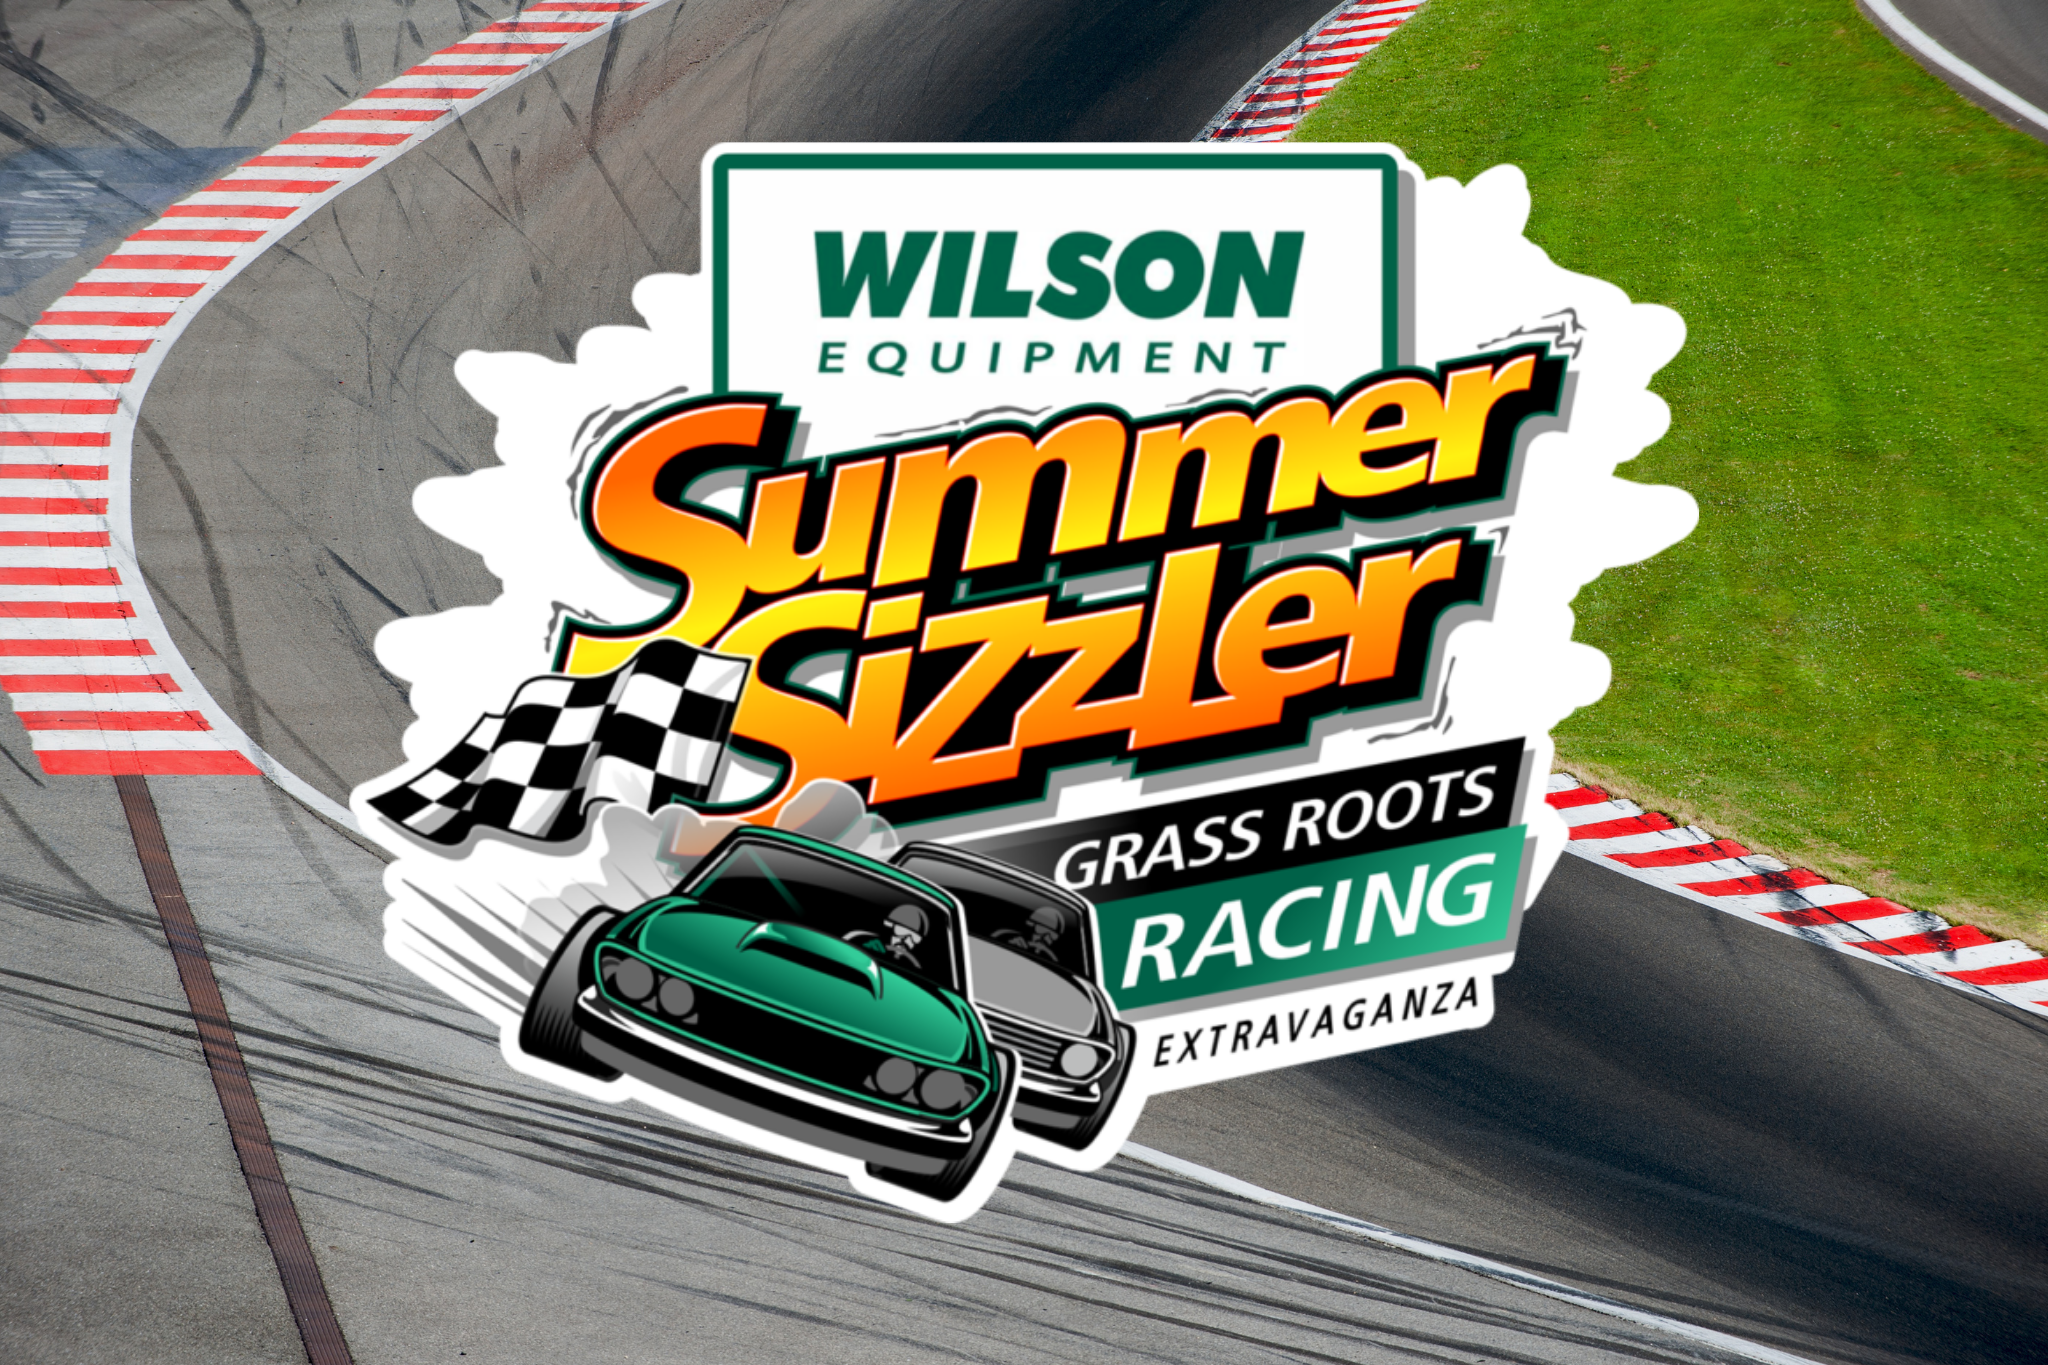 SUMMER SIZZLER OFFERS BIG $ TO GRASSROOTS RACERS (NS)